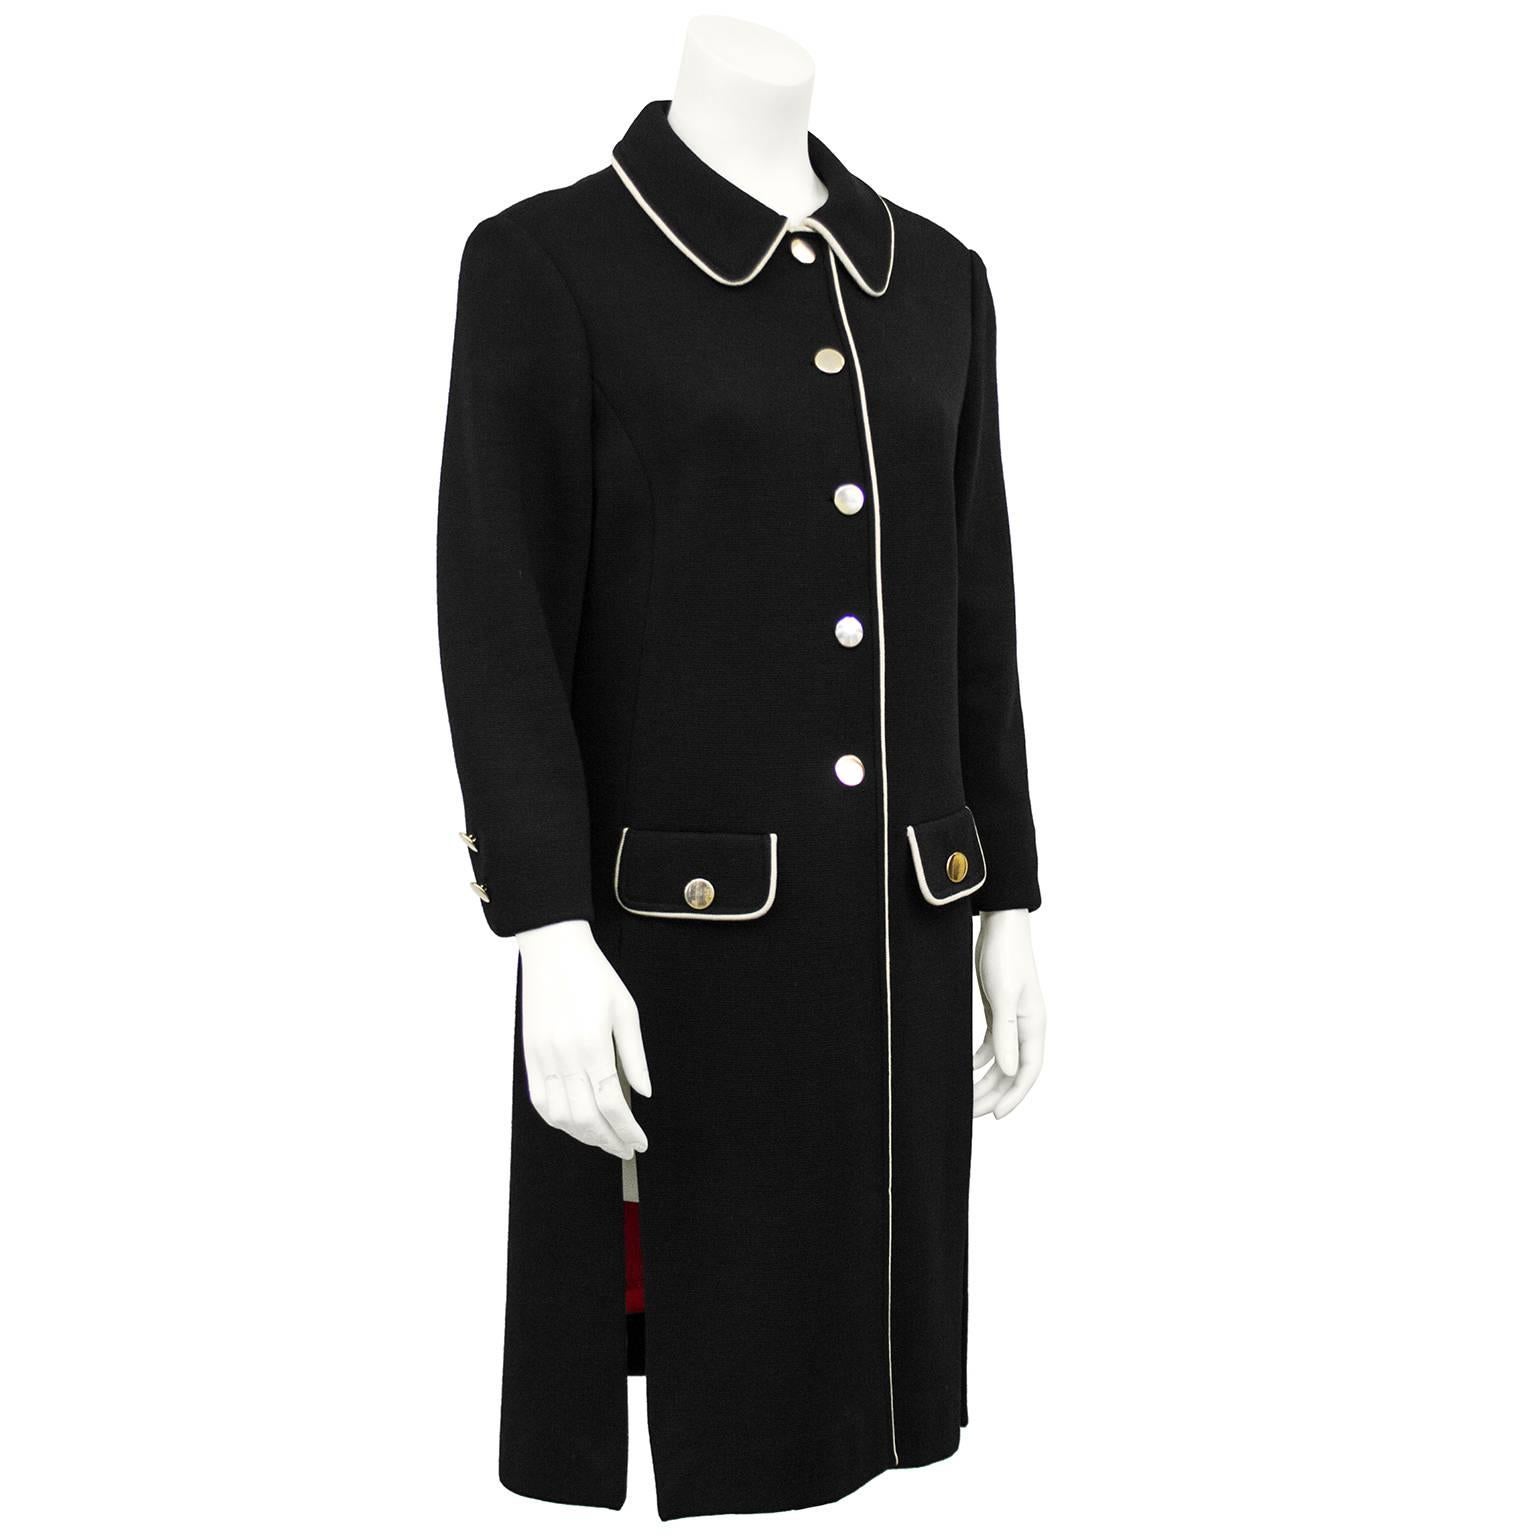 1970s Carnaby black Mod look knit coat. Cream trim, gold buttons, faux patch flap pockets, red sateen lining and tunic like sides slits. Amazing seasonal transition piece. Excellent vintage condition. Fits like a US 6. Dry cleaned and ready to wear